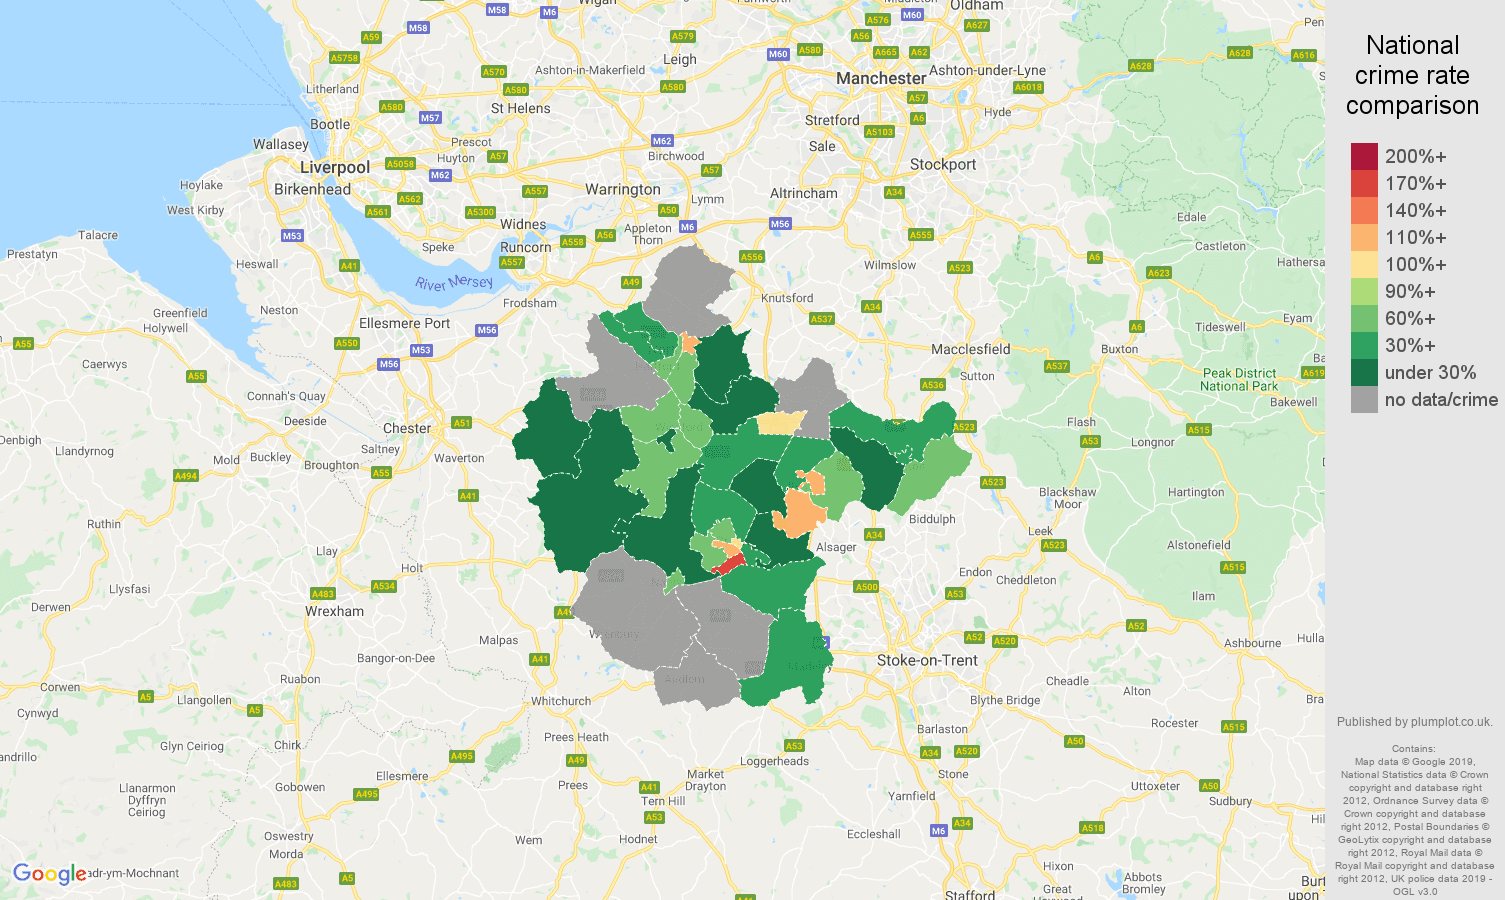 Crewe possession of weapons crime rate comparison map